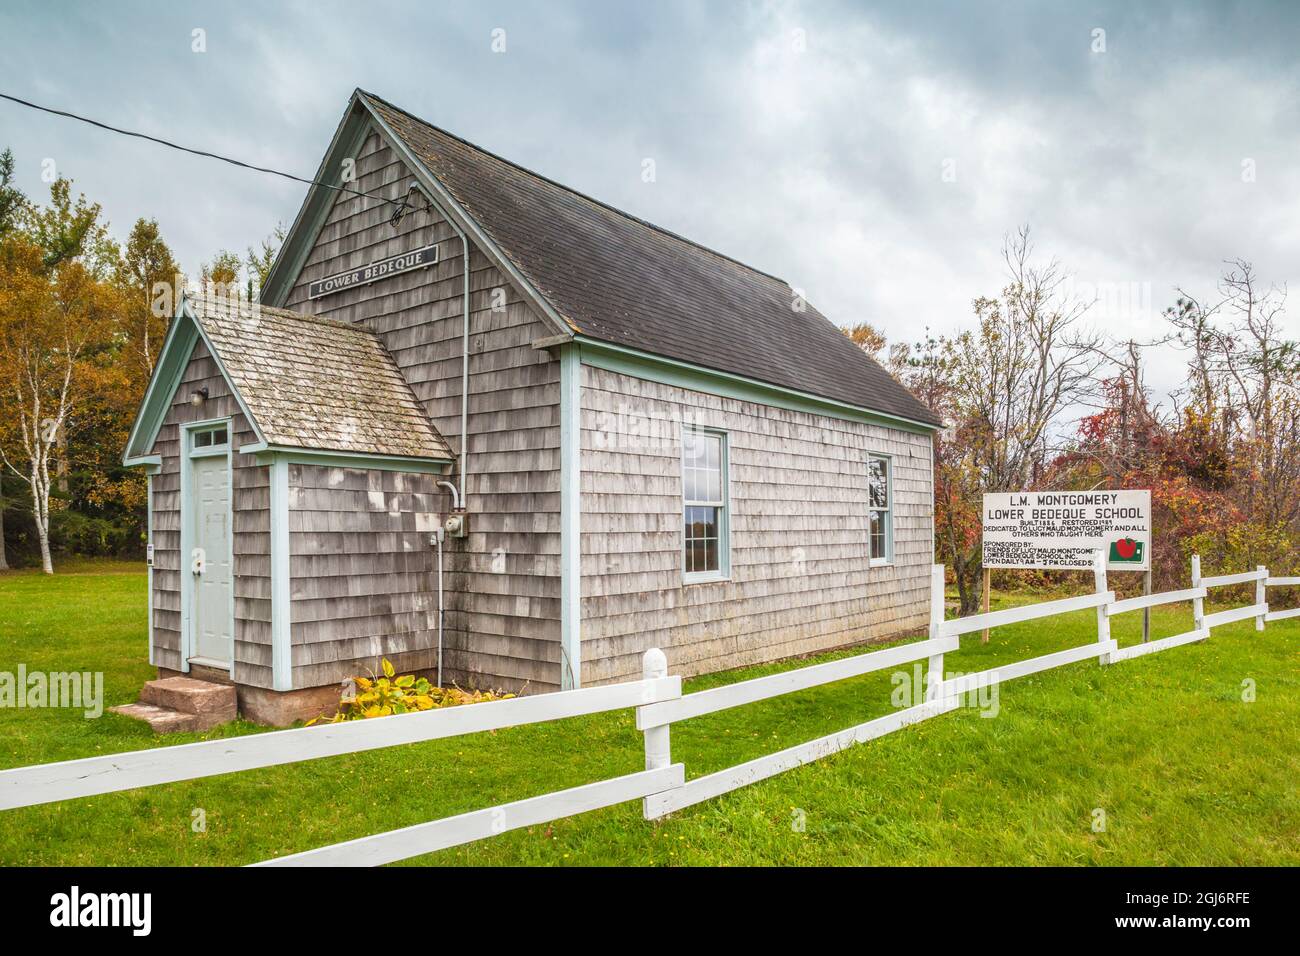 Canada, Prince Edward Island. Lower Bedeque Schoolhouse, Lucy Maud Montgomery, author of Anne of Green Gables, was a teacher here. Stock Photo